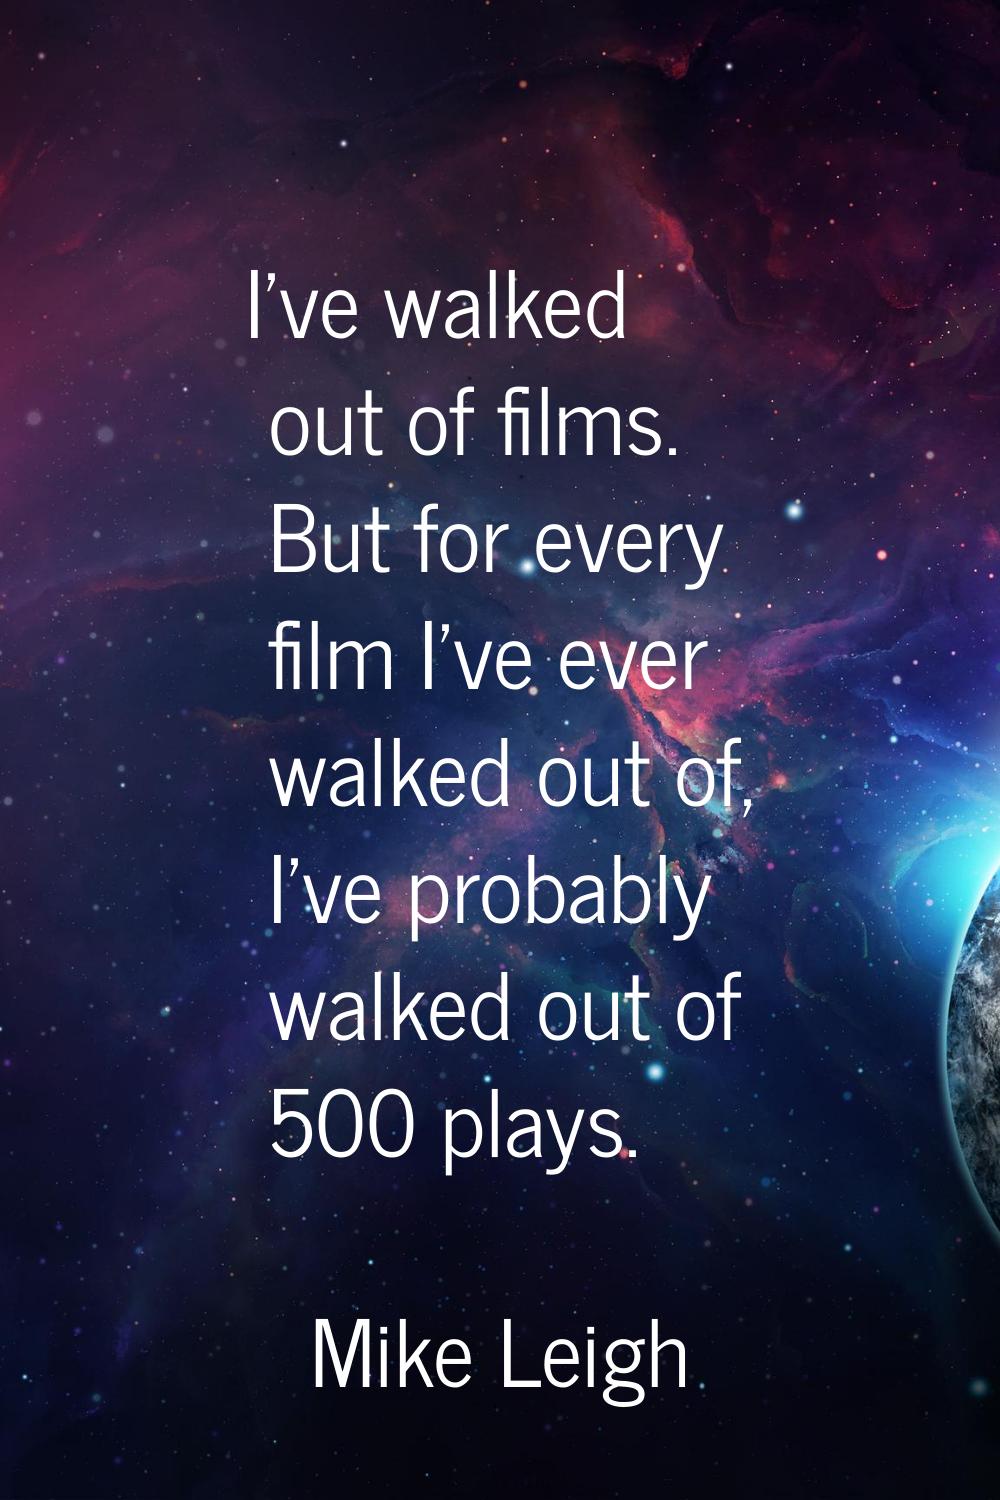 I've walked out of films. But for every film I've ever walked out of, I've probably walked out of 5